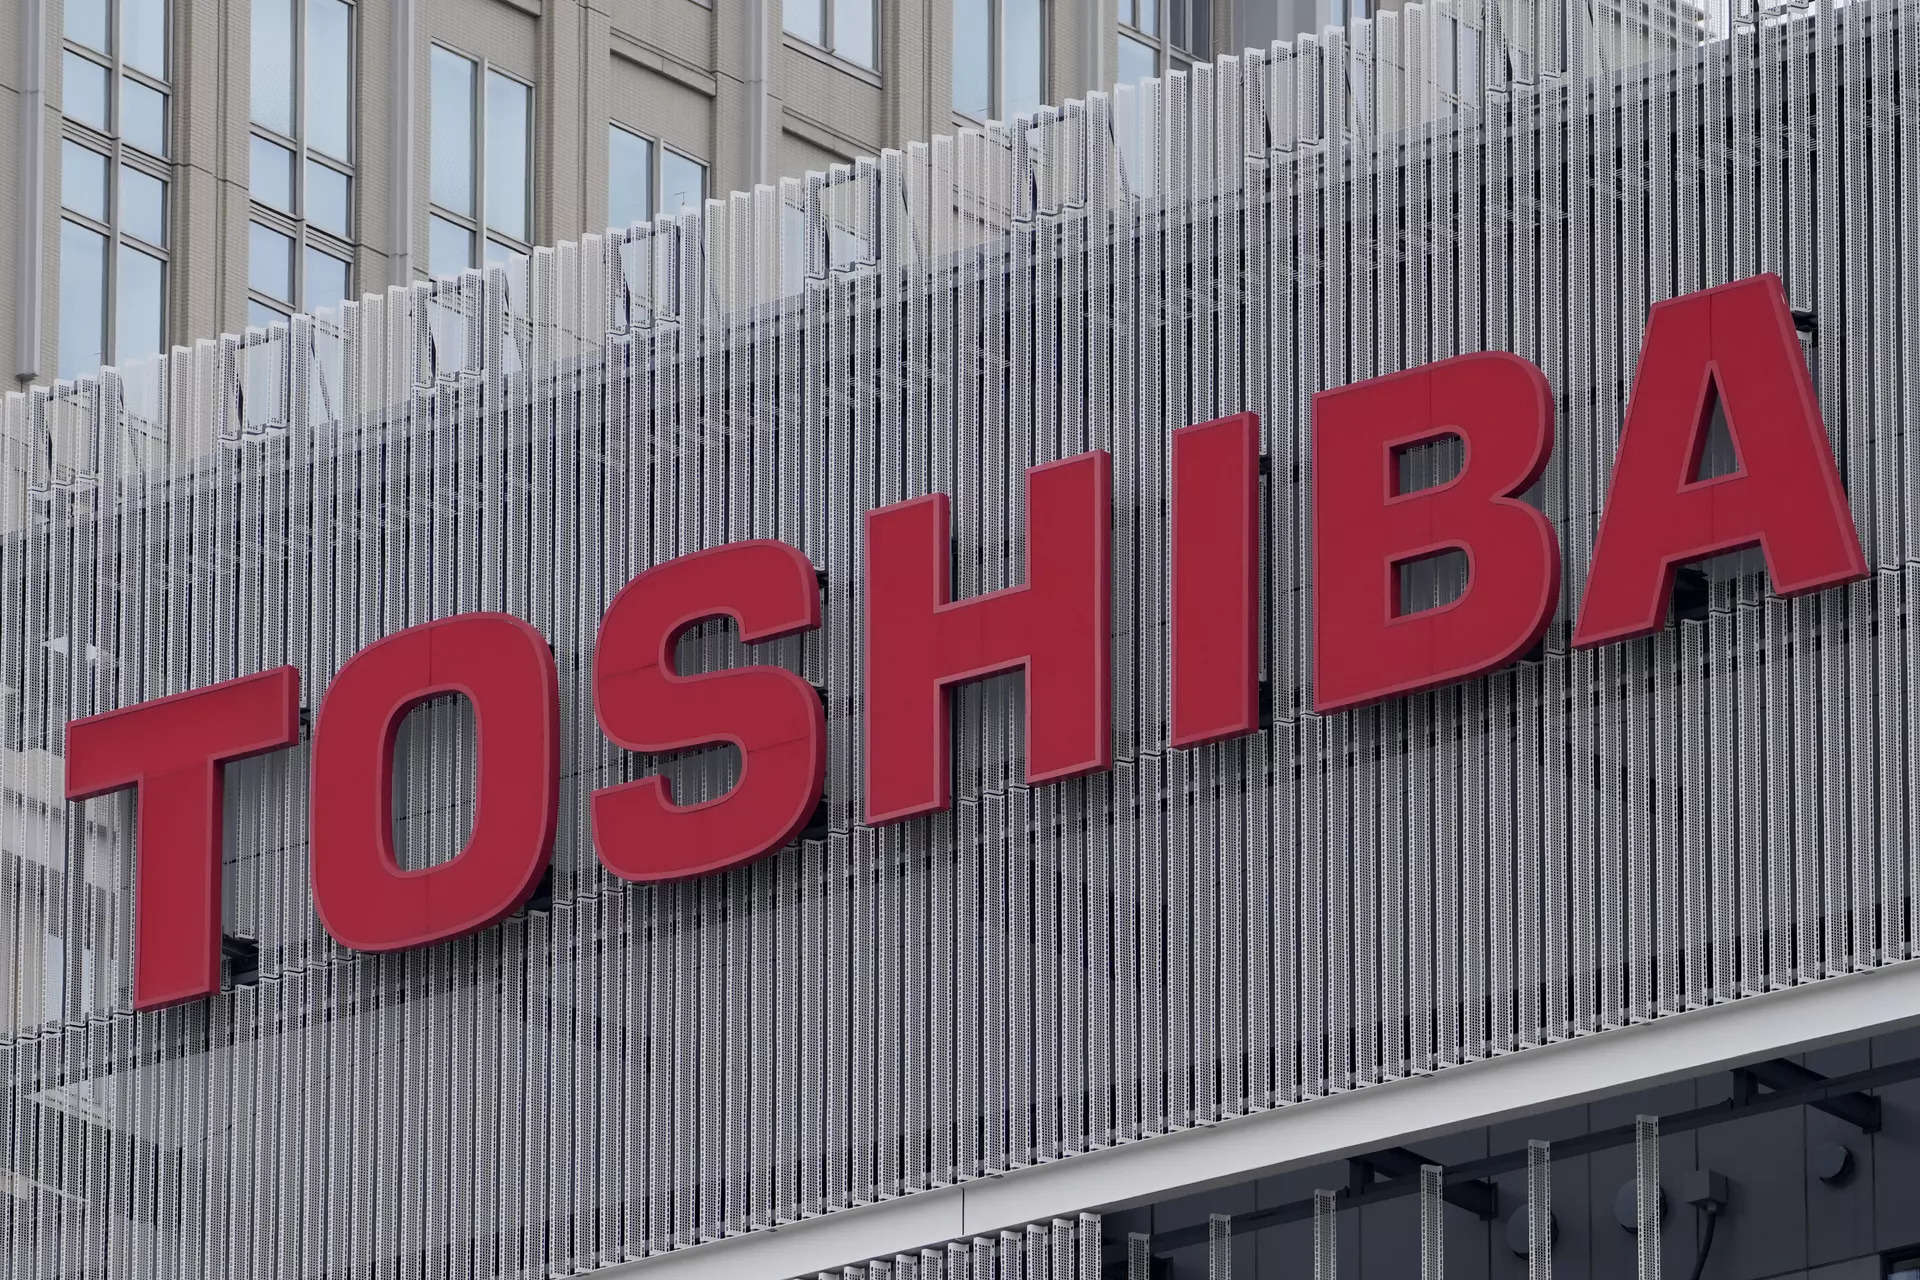 Toshiba delisted after 74 years, faces future with new owners 